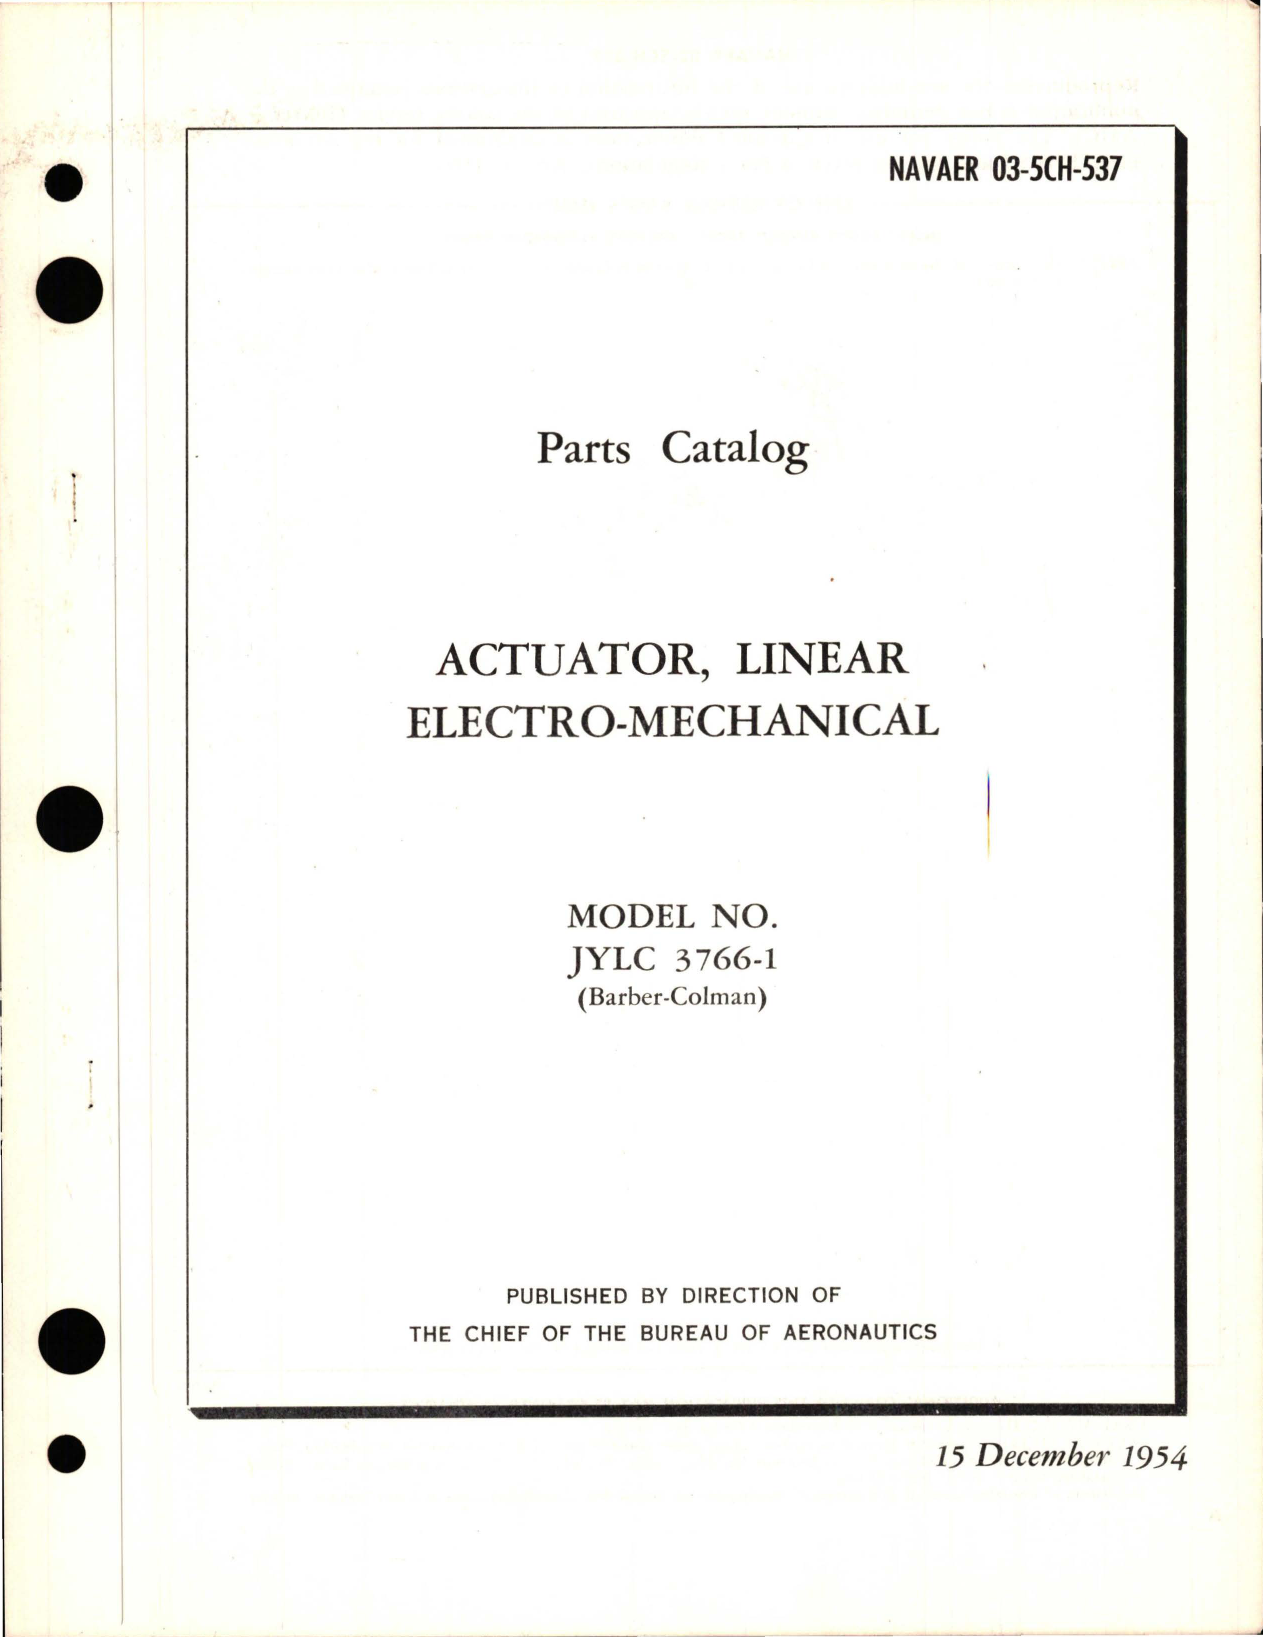 Sample page 1 from AirCorps Library document: Parts Catalog for Linear Electro-Mechanical Actuator - Model JYLC 3766-1